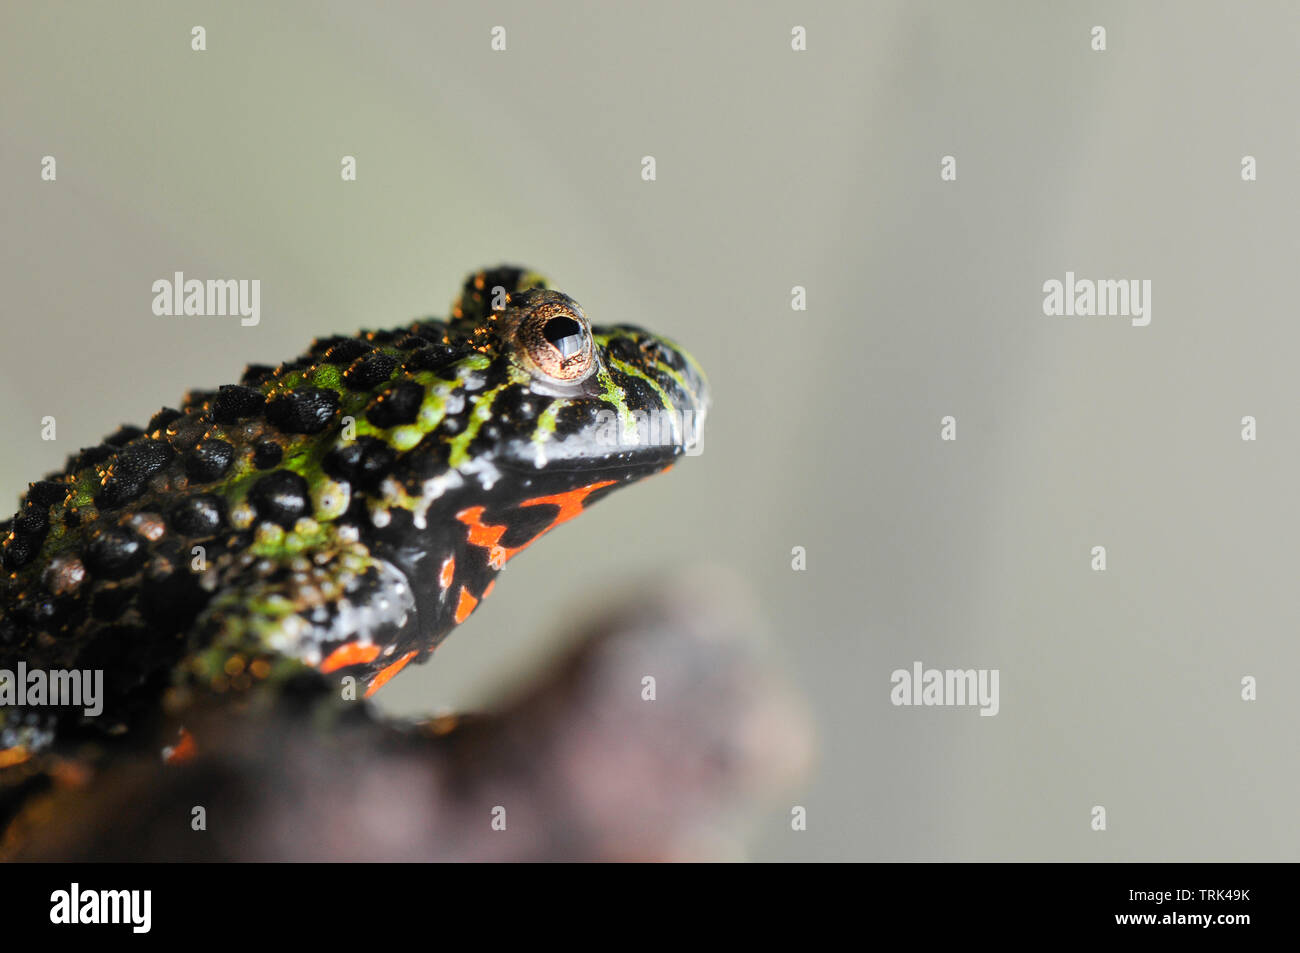 Fire-Bellied Toad Stands on a Log Stock Photo